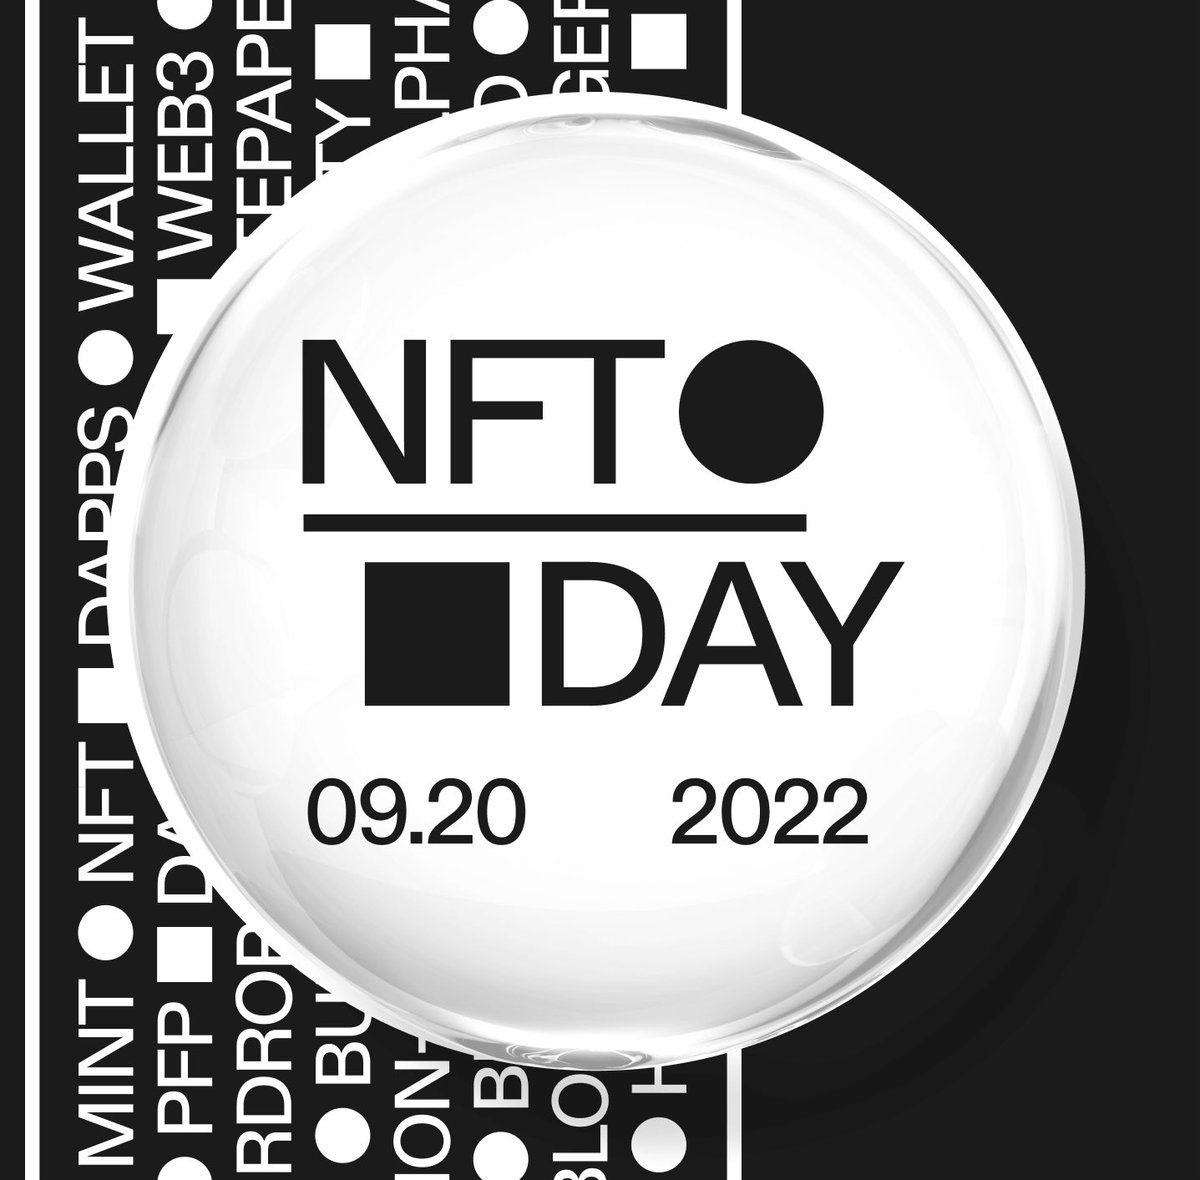 My @OfficialNFTDay checklist: ✅ Call out sick ✅ Prepare large amounts of caffeine ✅ Constantly Refresh #NFTDay feed ✅ !Vibes ✅ Enjoy free stuff 😎😎😎